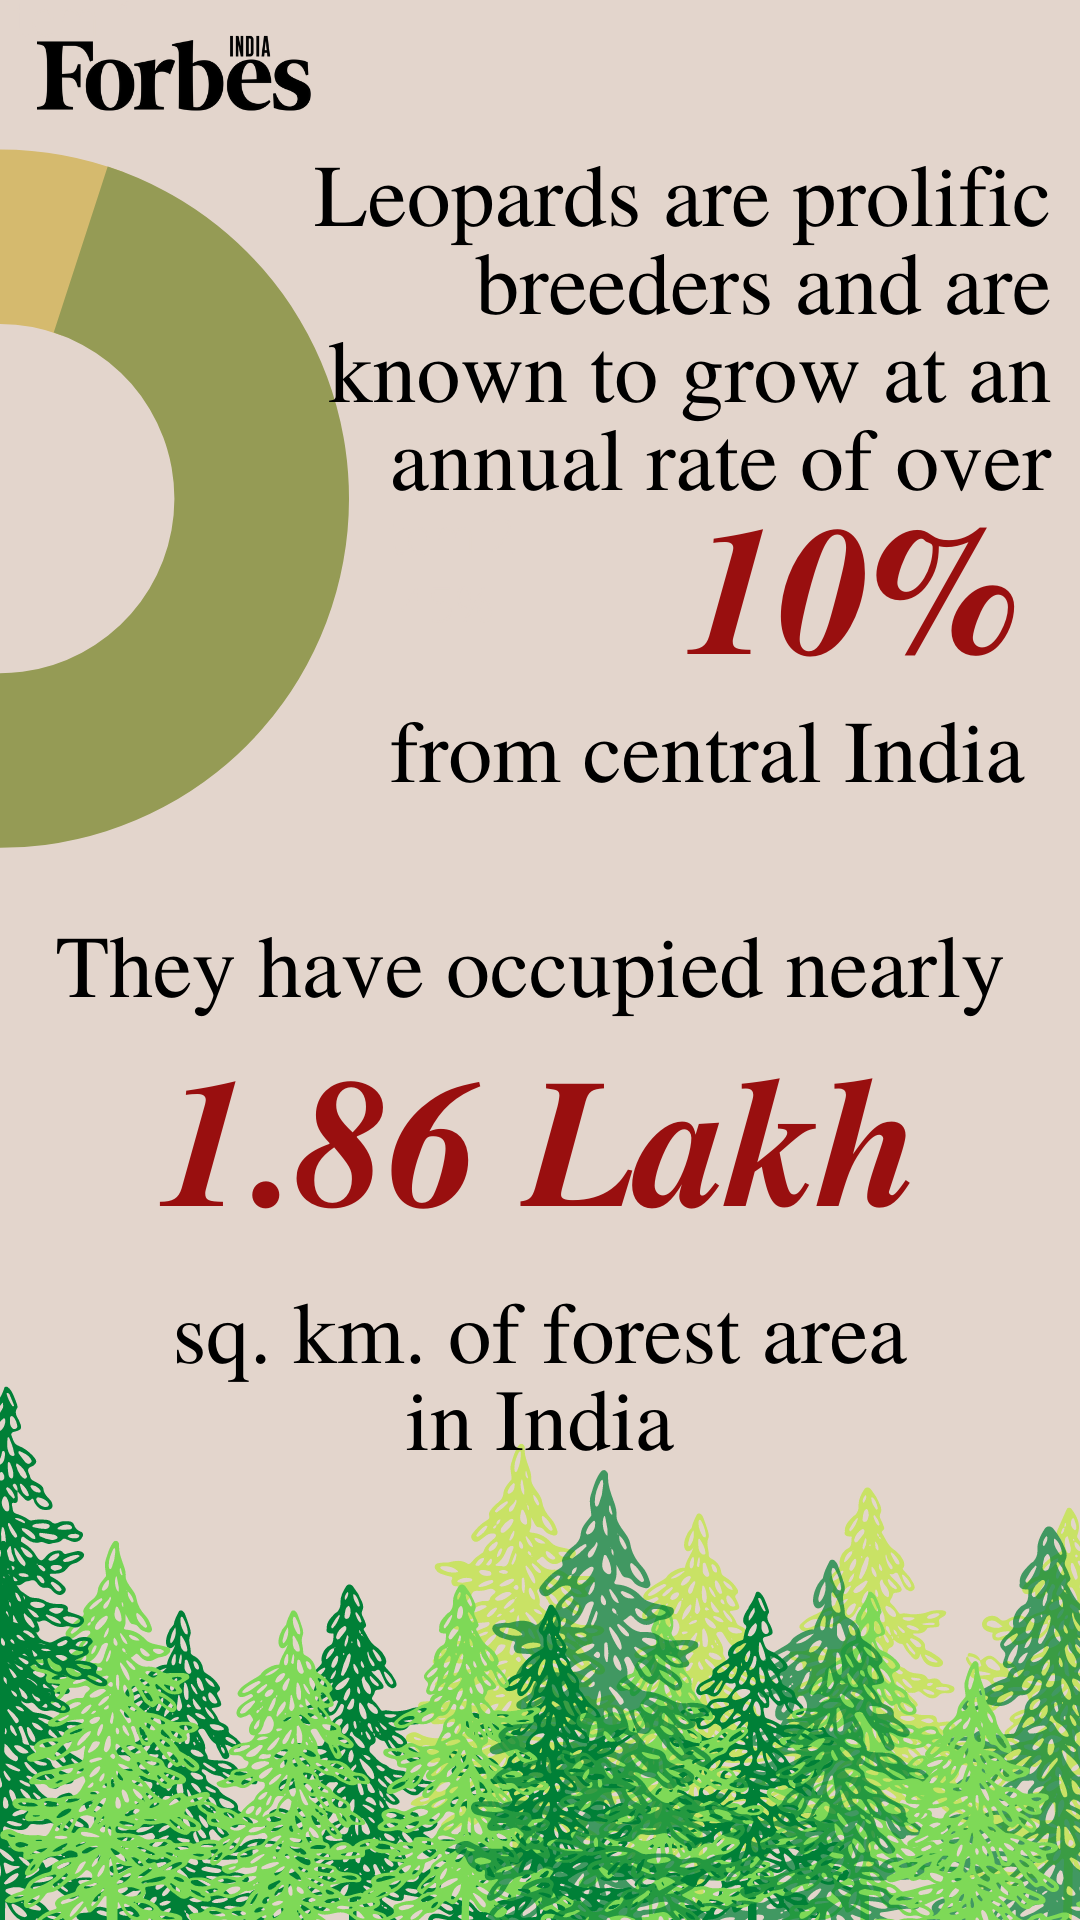 News by Numbers: India's leopard population grows 62% in 4 years but still 'vulnerable'